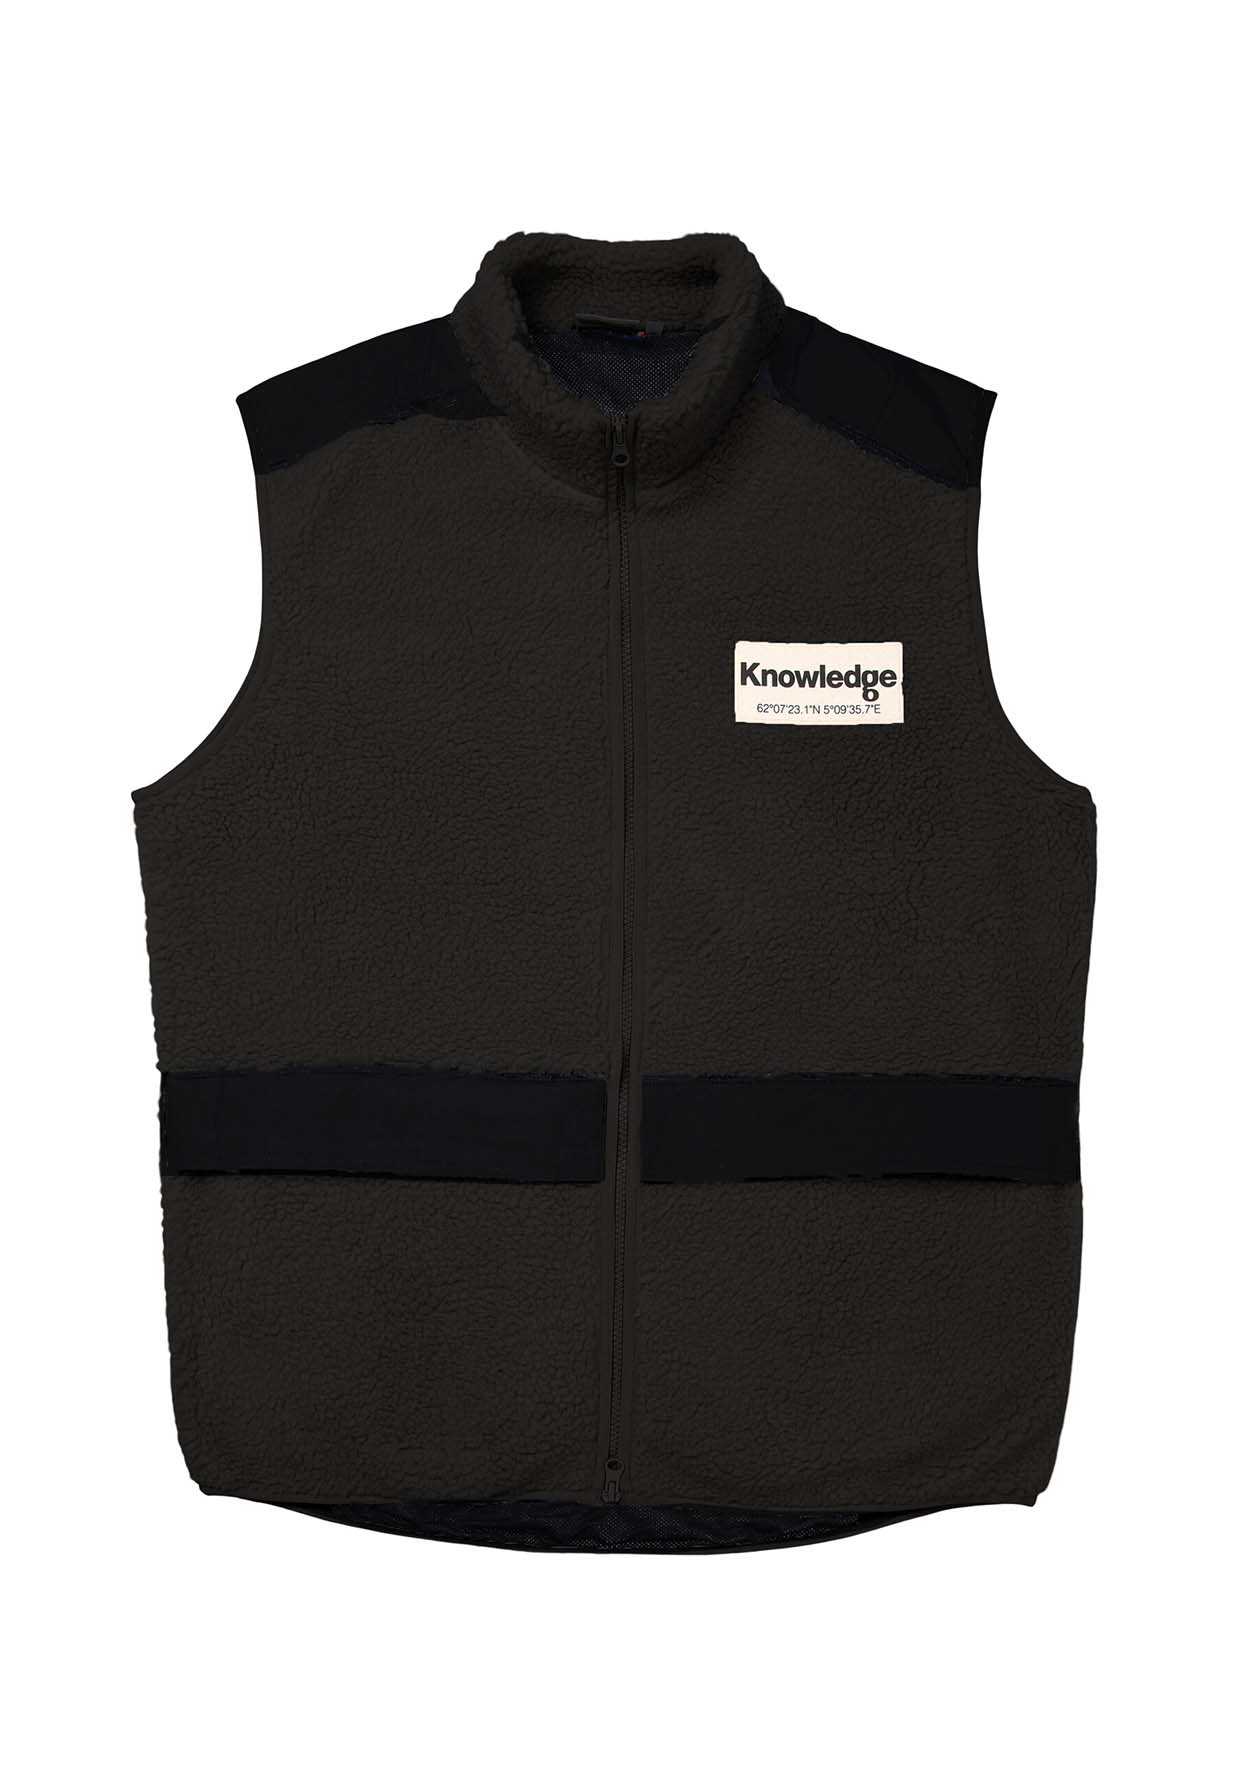 KNOWLEDGECOTTON APPAREL Teddy Fleece Hood Vest With Rib Stop In Contrast Color black jet M